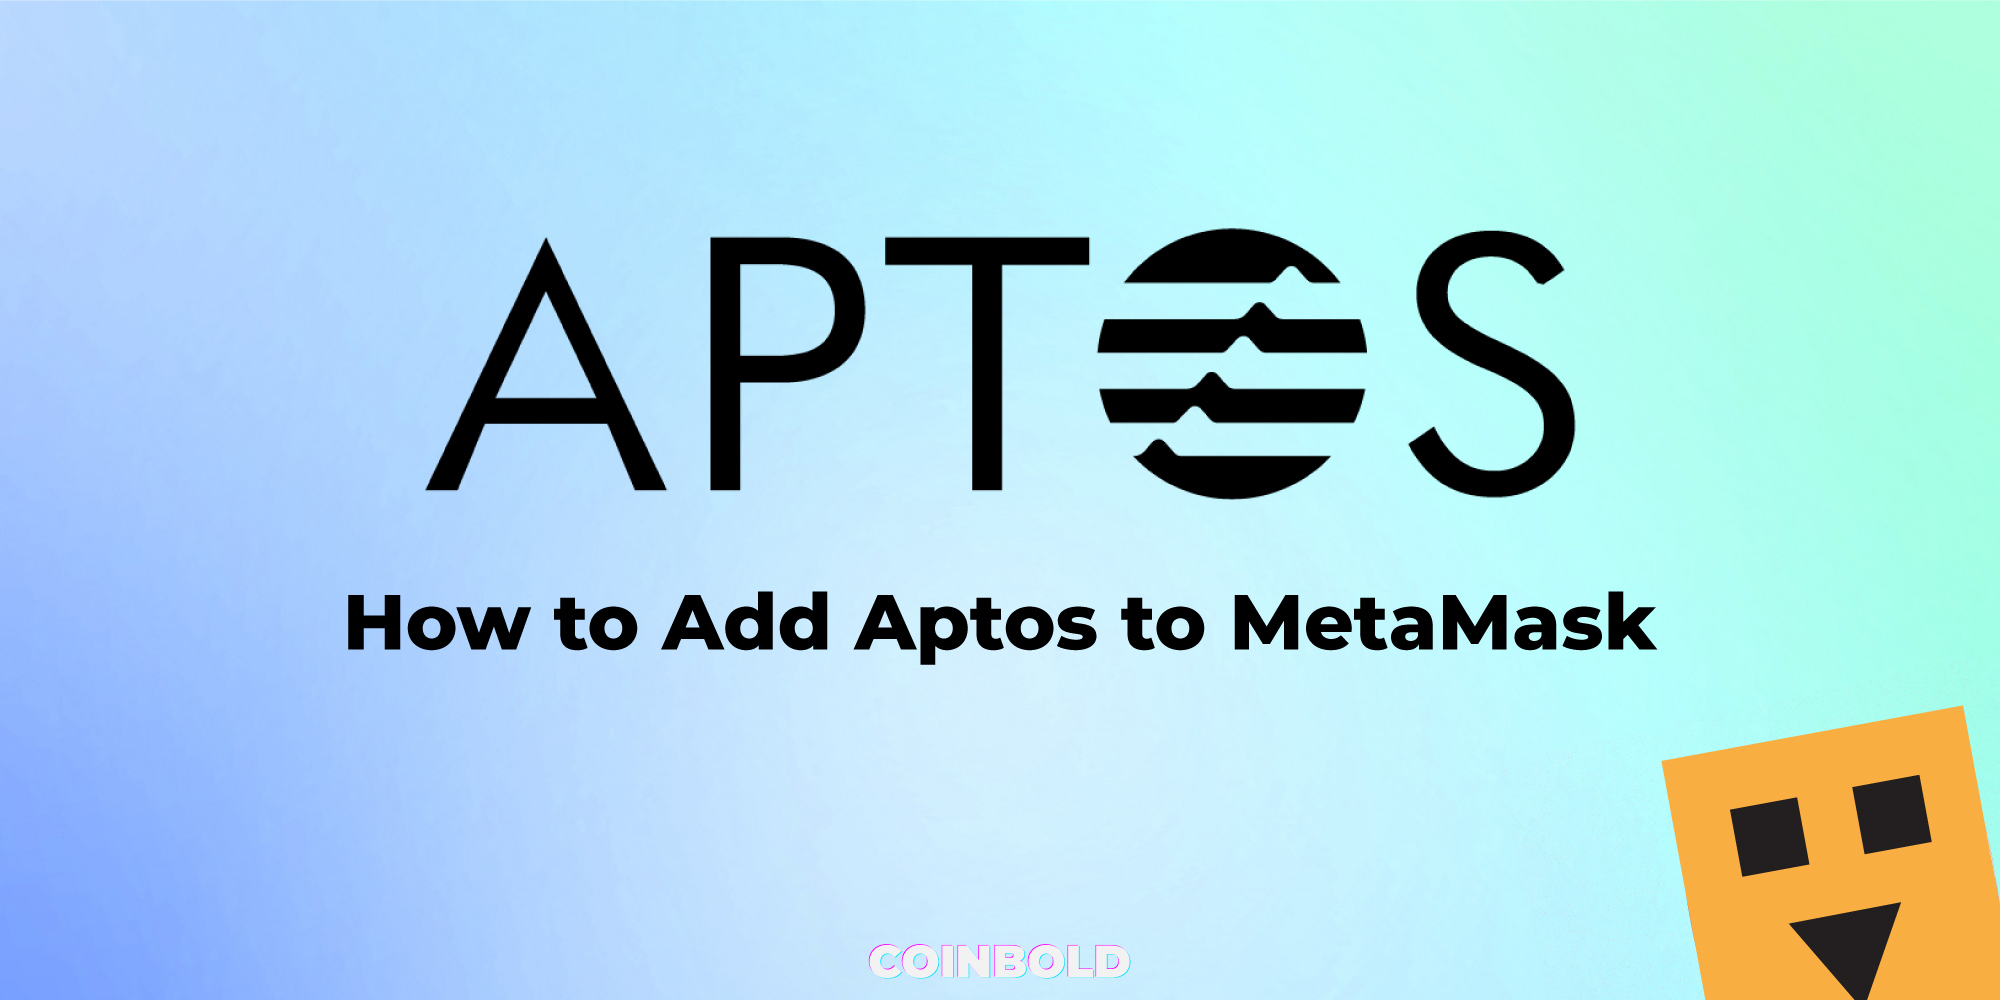 How to Add Aptos to MetaMask